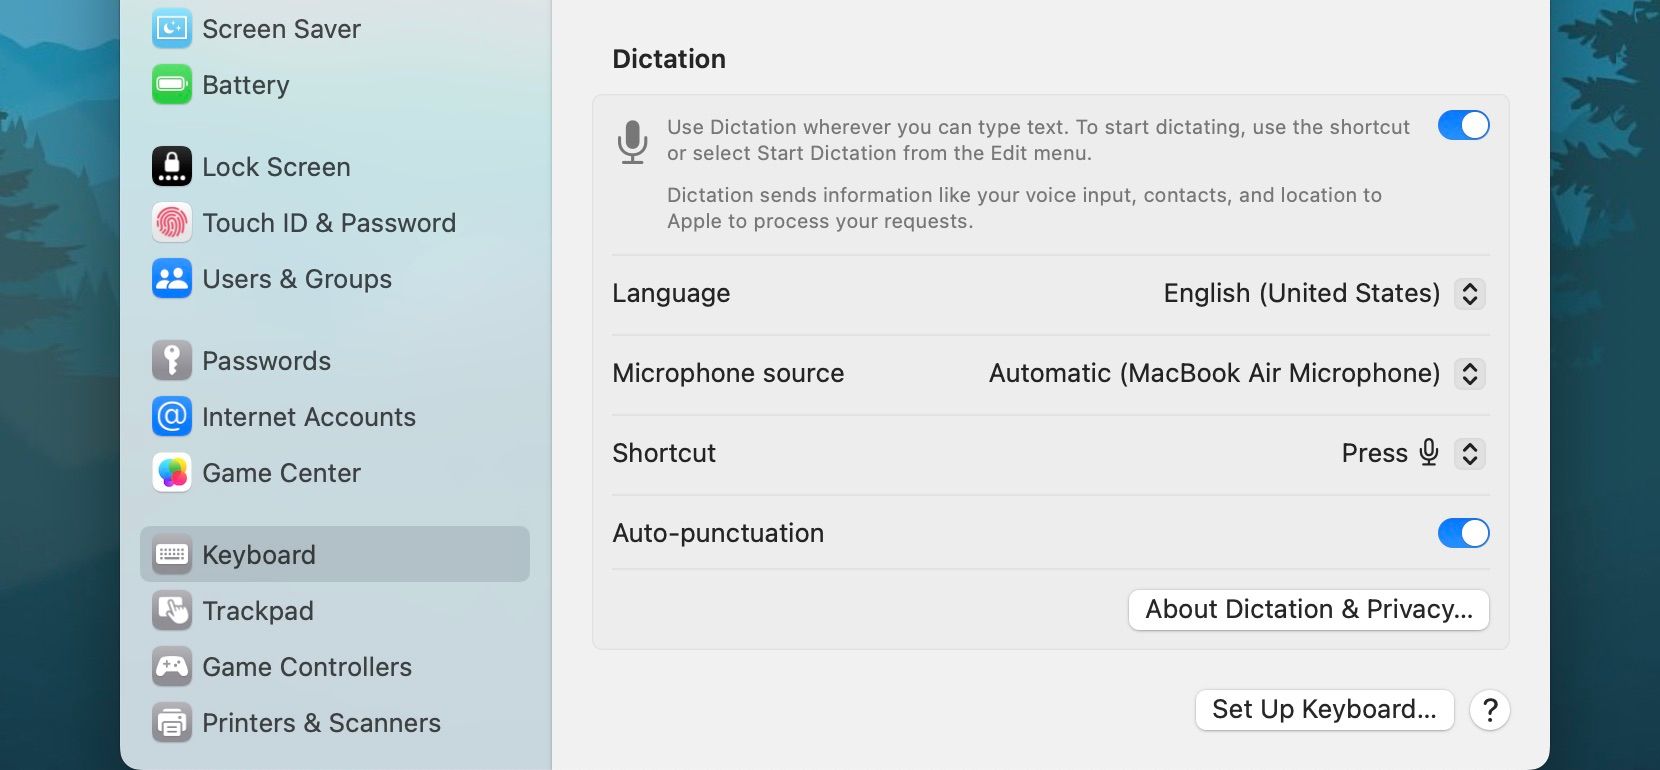 Dictation options in System Settings on macOS Ventura